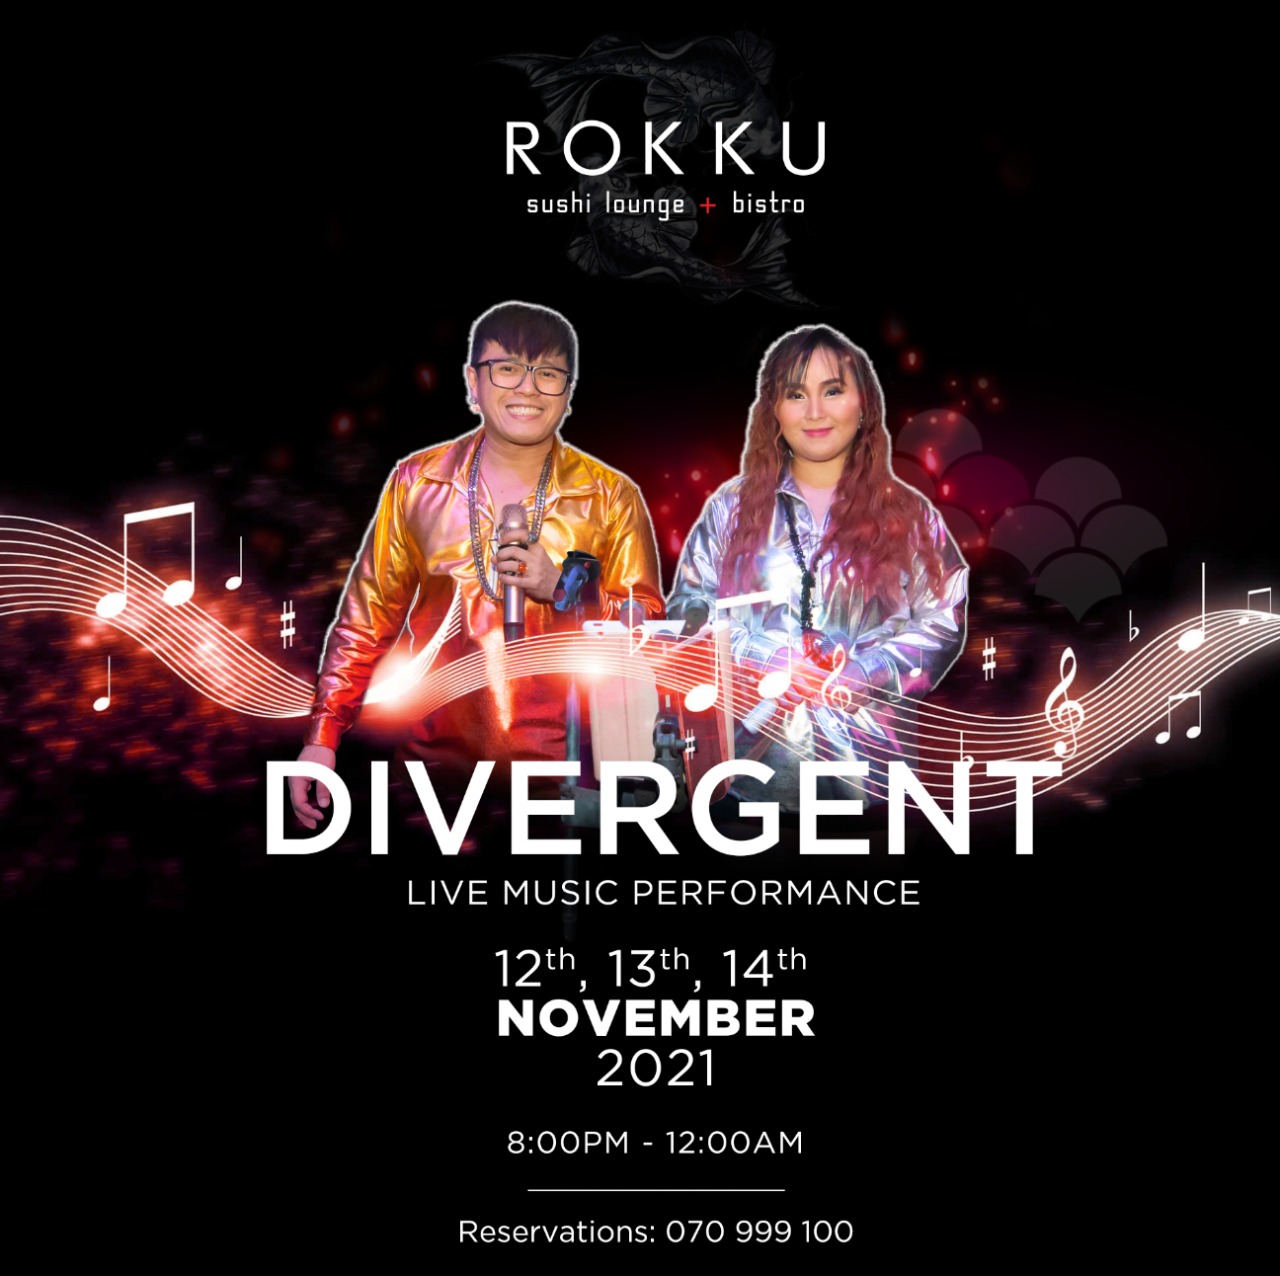 DIVERGENT LIVE MUSIC PERFORMANCE AT ROKKU ON NOVEMBER 12TH – 14TH